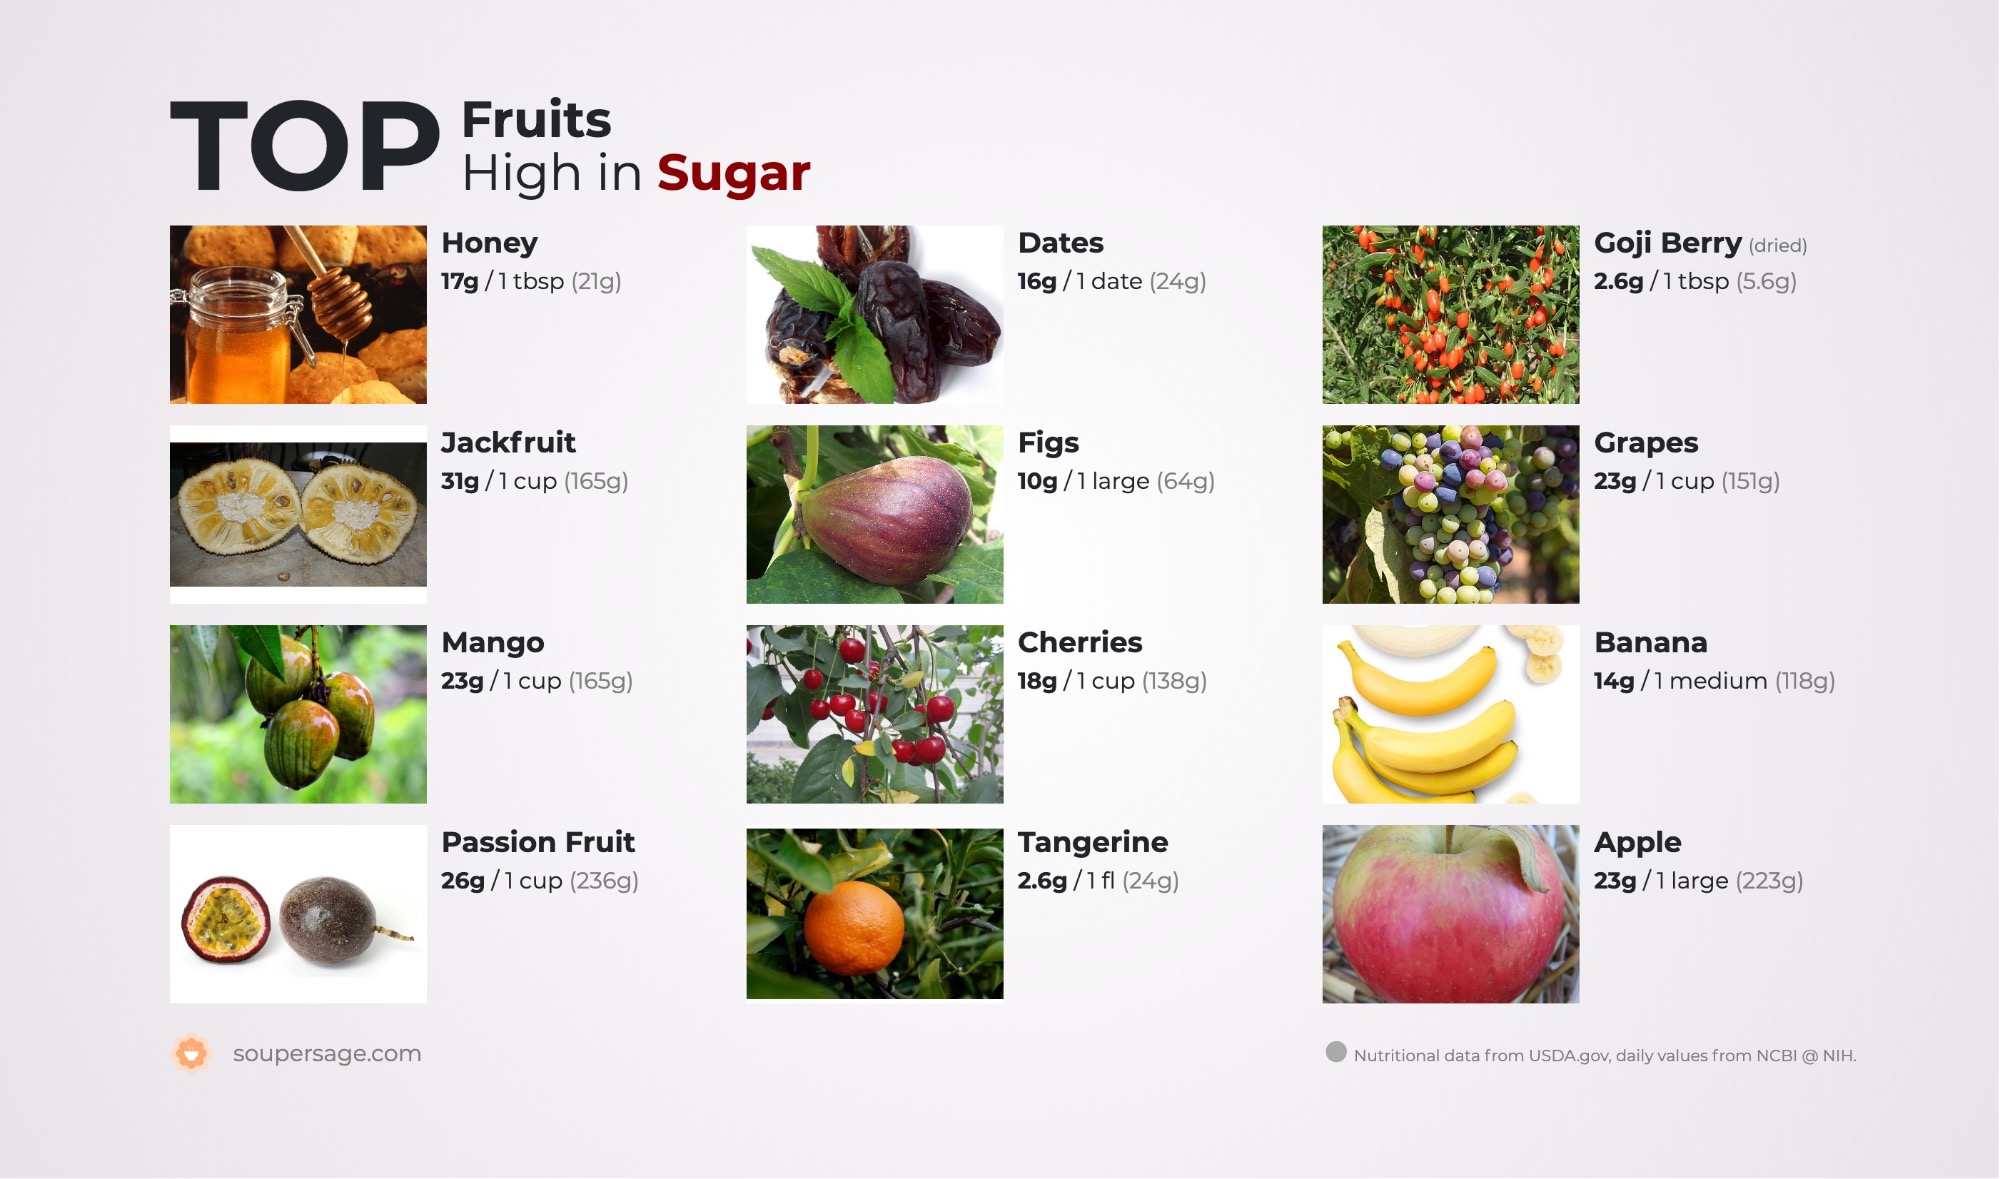 image of Top Fruits High in Sugar